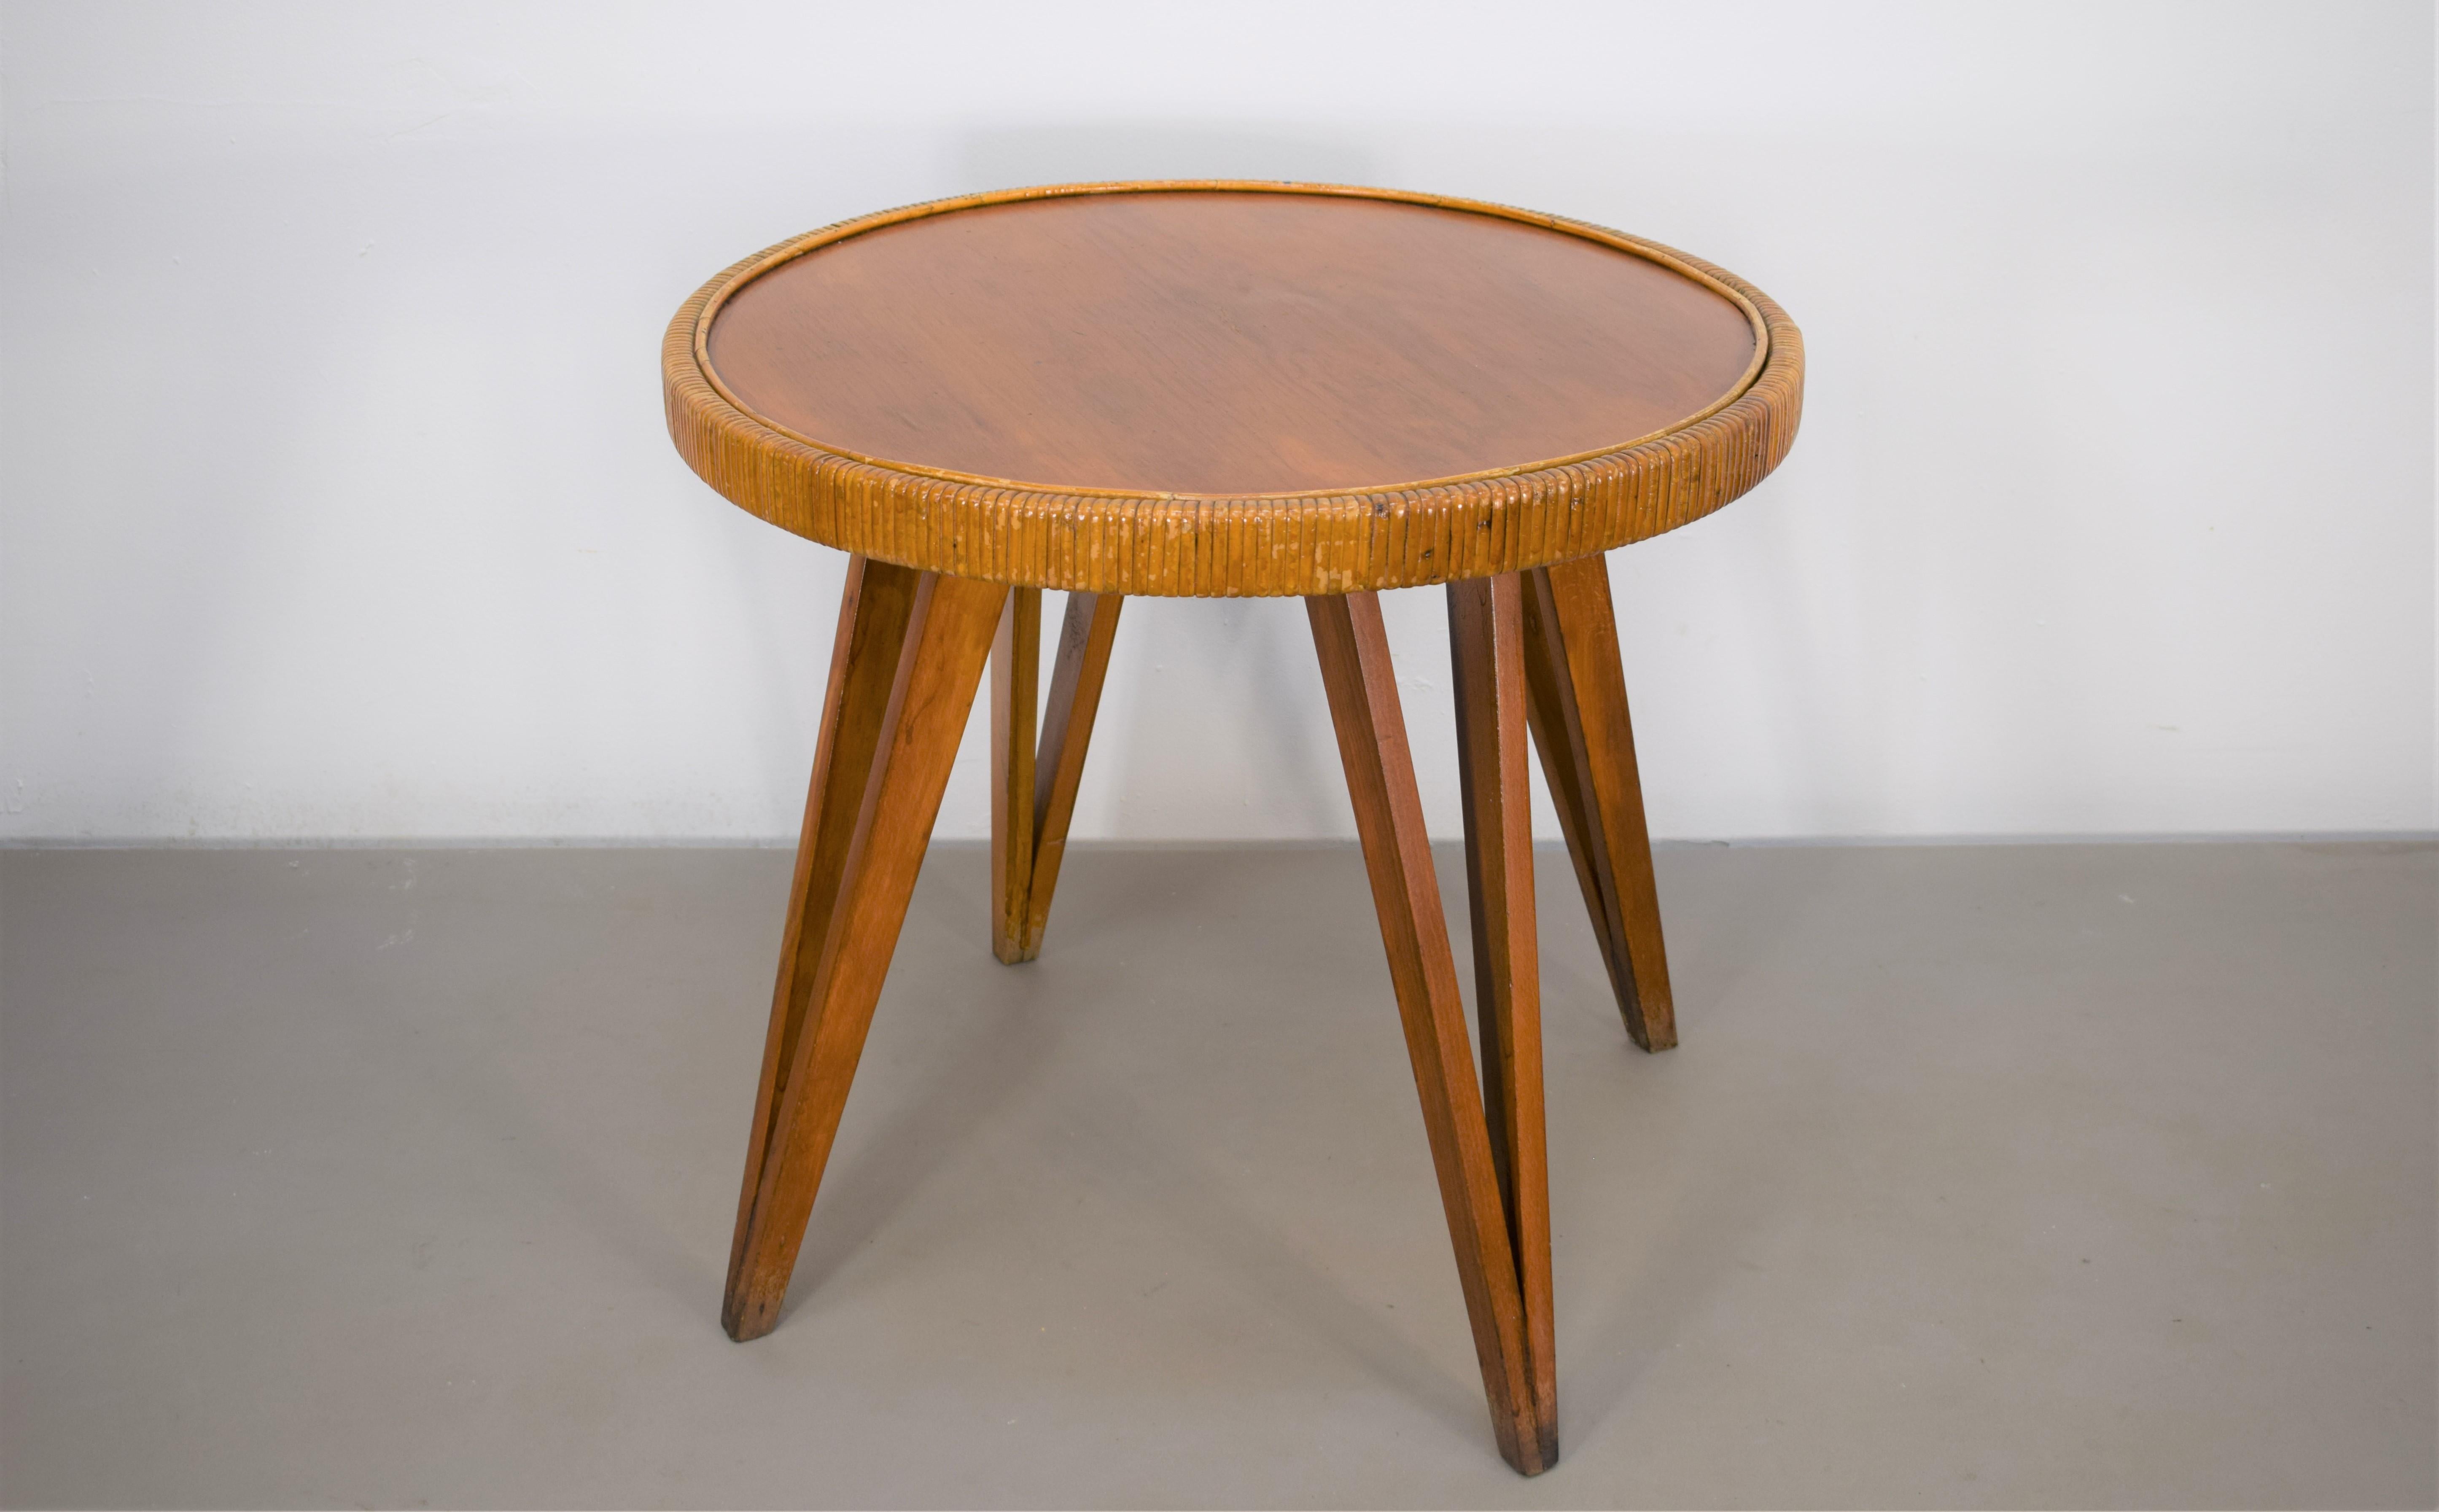 Italian coffee table by Augusto Romano, 1940s.

Dimensions: H= 60 cm; D= 66 cm.